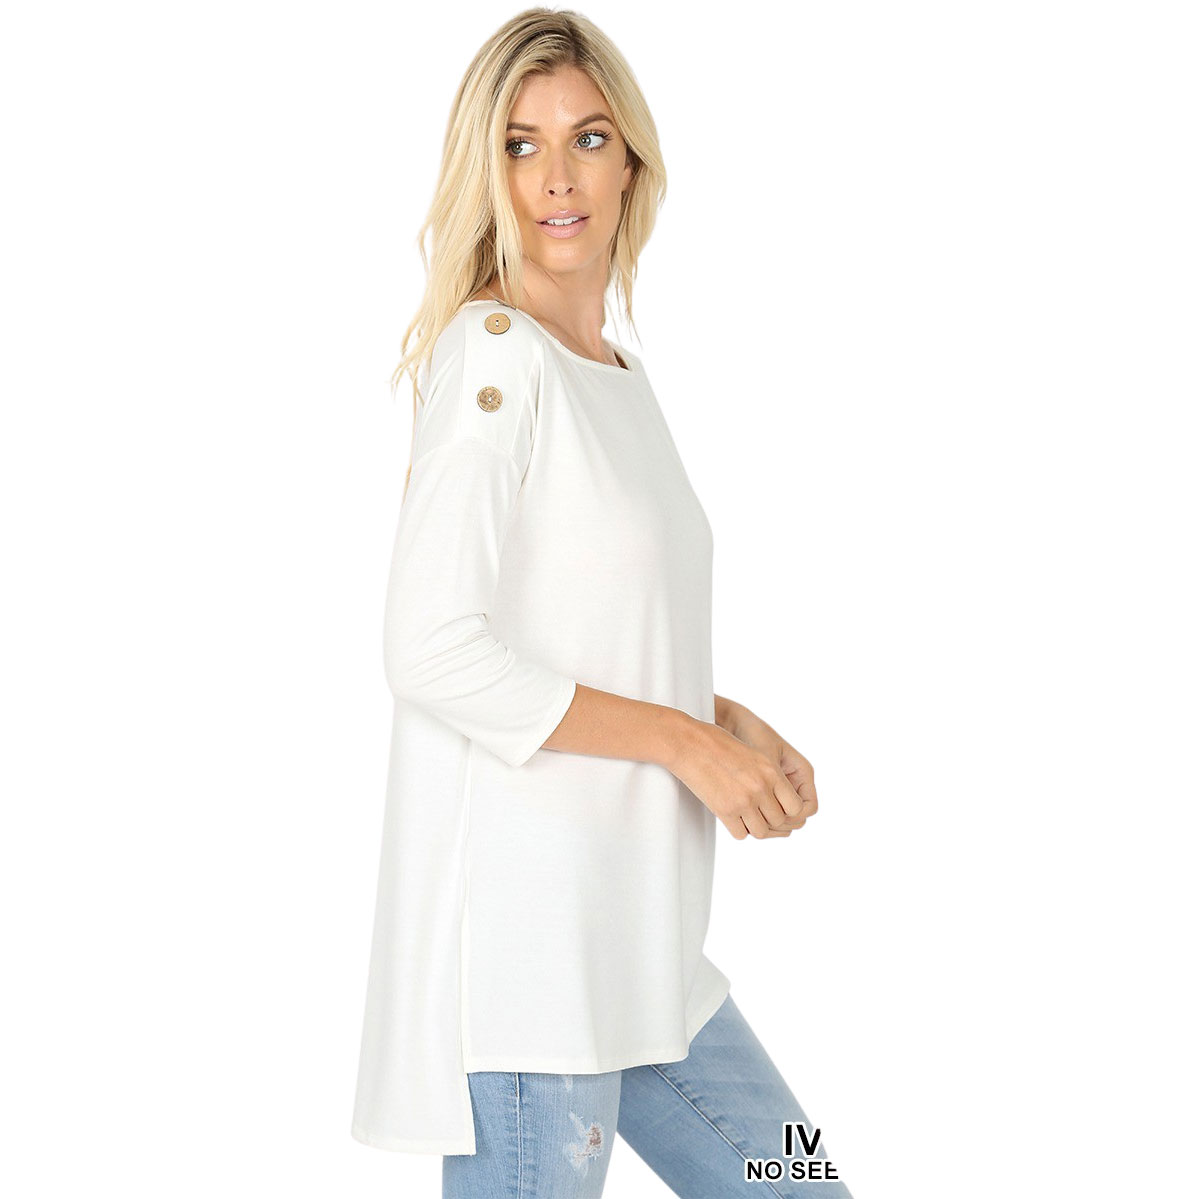 2082 - Boat Neck Hi-Lo Tops w/Wooden Buttons Ivory Boat Neck Hi-Lo Top w/ Wooden Buttons 2082 - Large